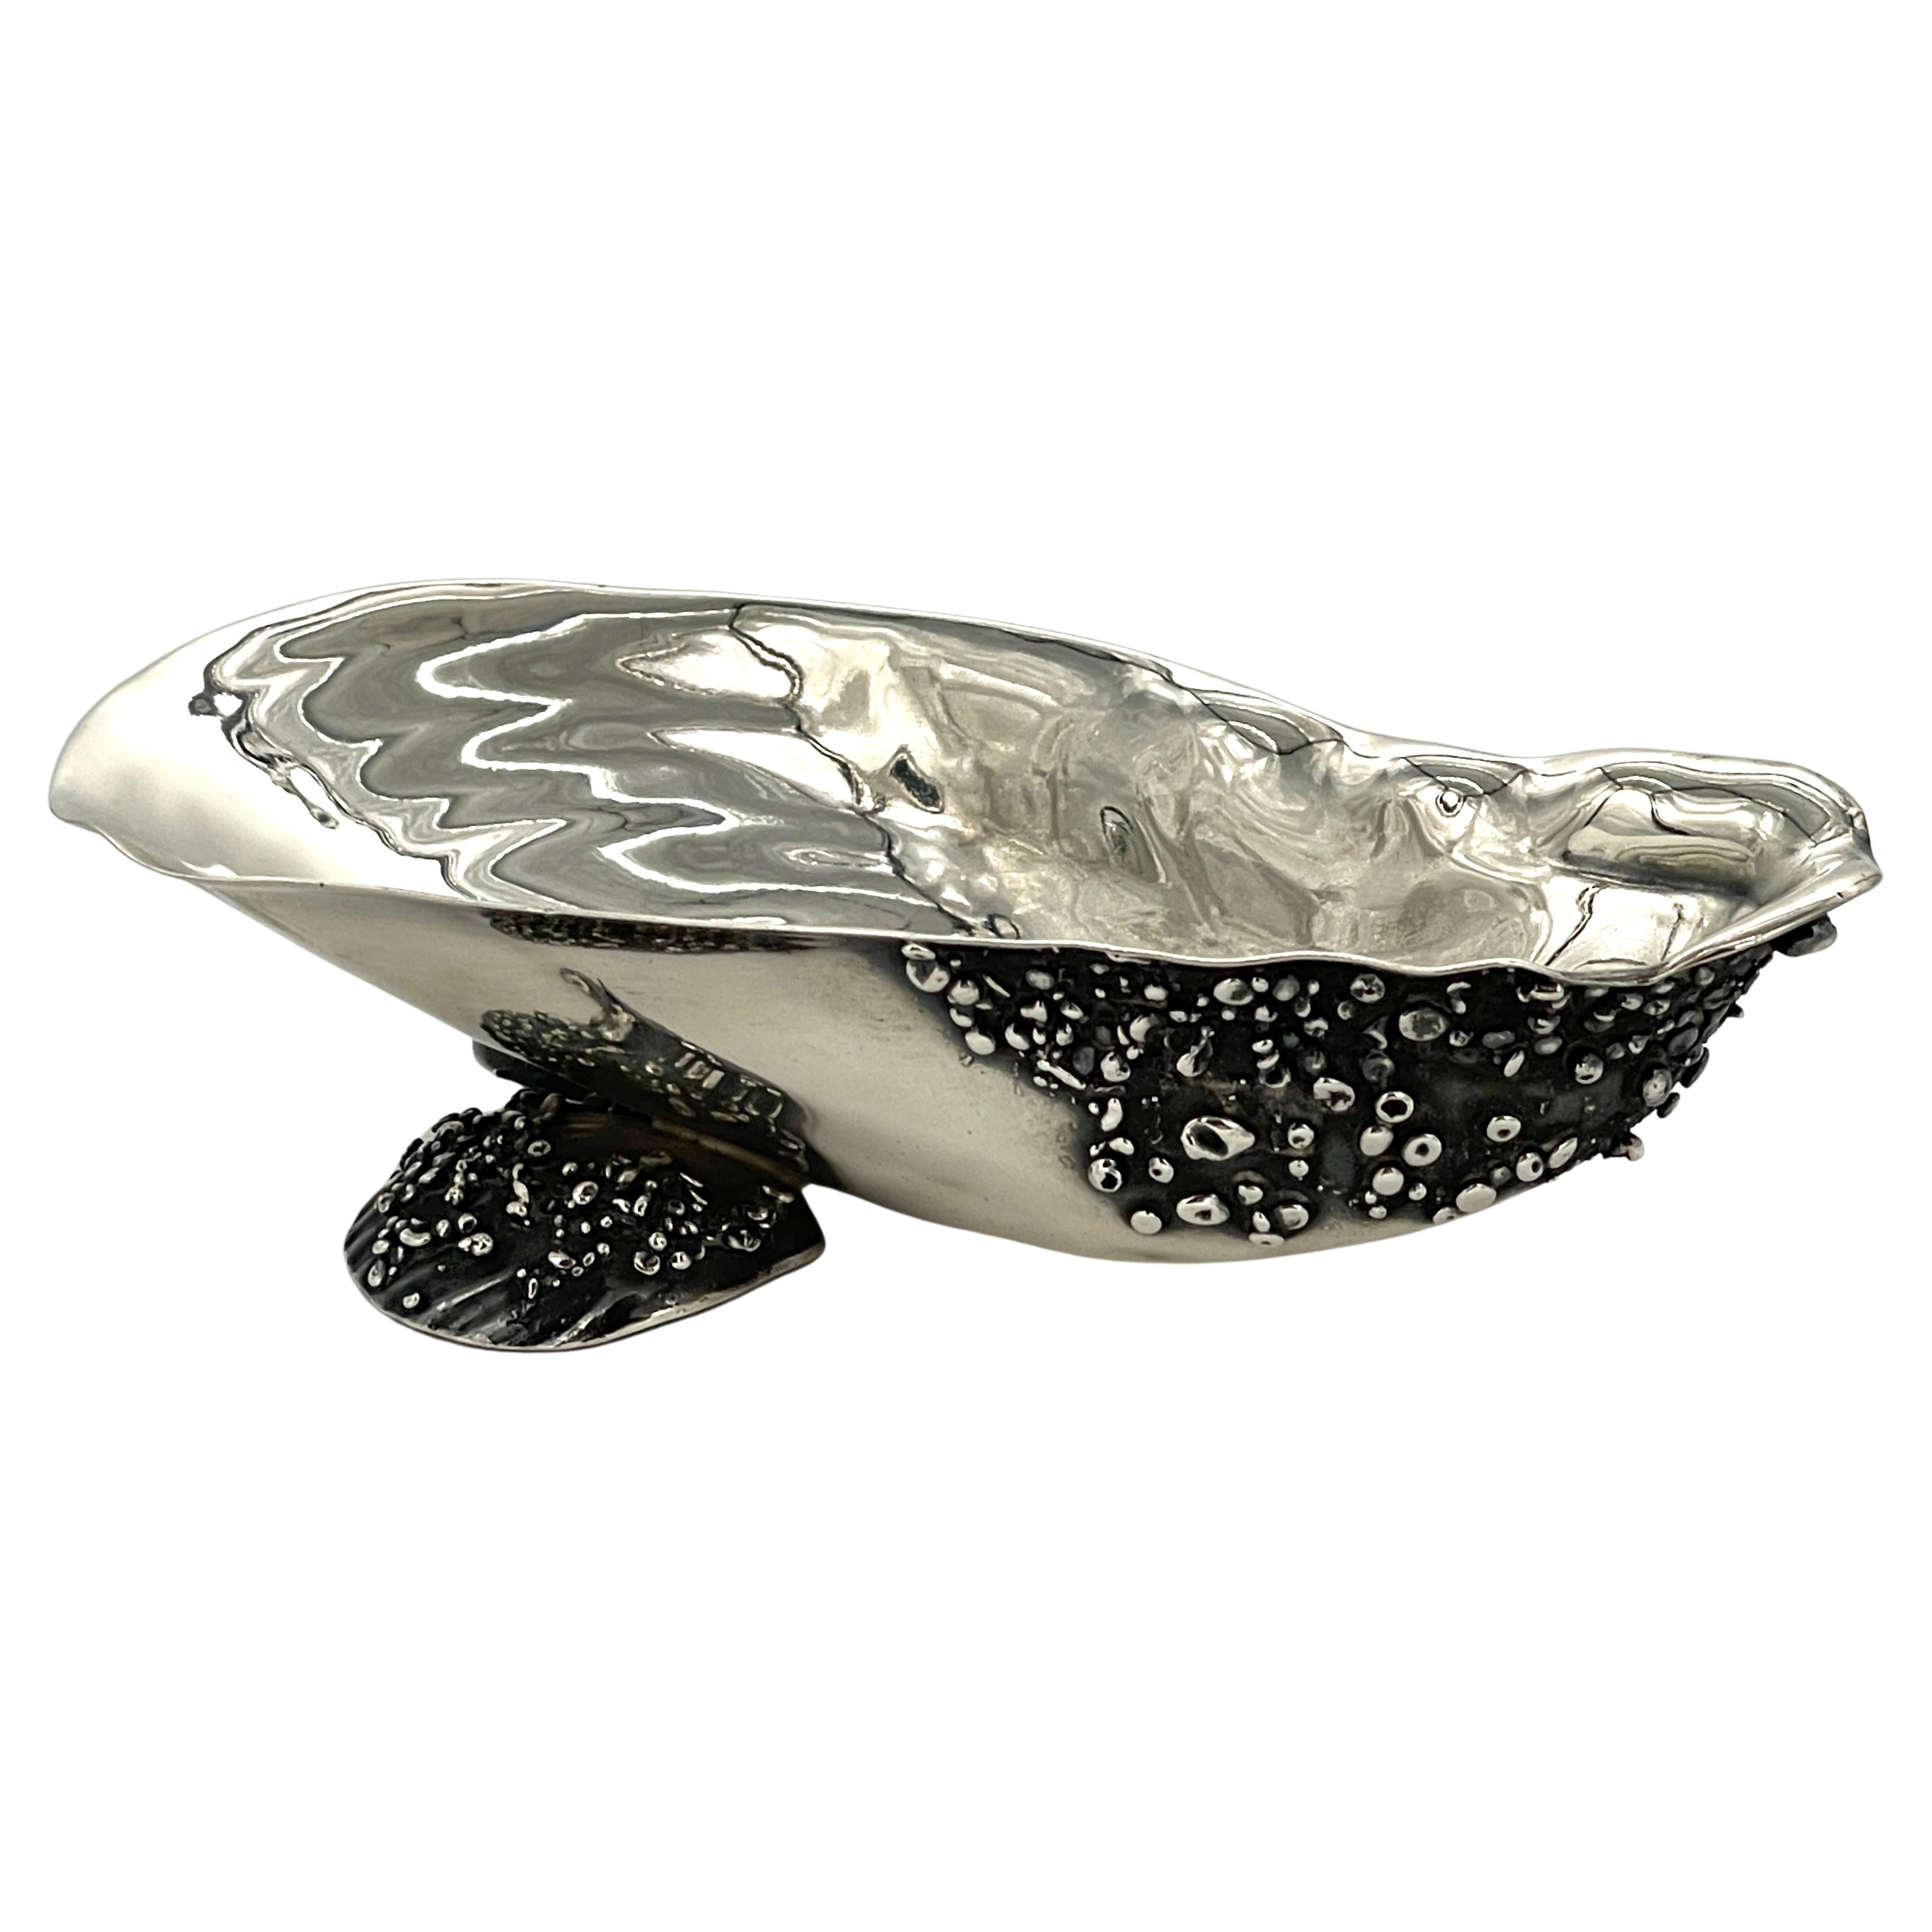 Gorham Mfg. Co. 'Narragansett' Sterling Silver Shell Oyster Serving Dish 
USA, circa 1890s 

A rare find, one of scarcest patterns of the Gorham Mfg. Co. 'Narragansett' 
This sterling silver shell oyster serving dish, diminutive in size yet  a